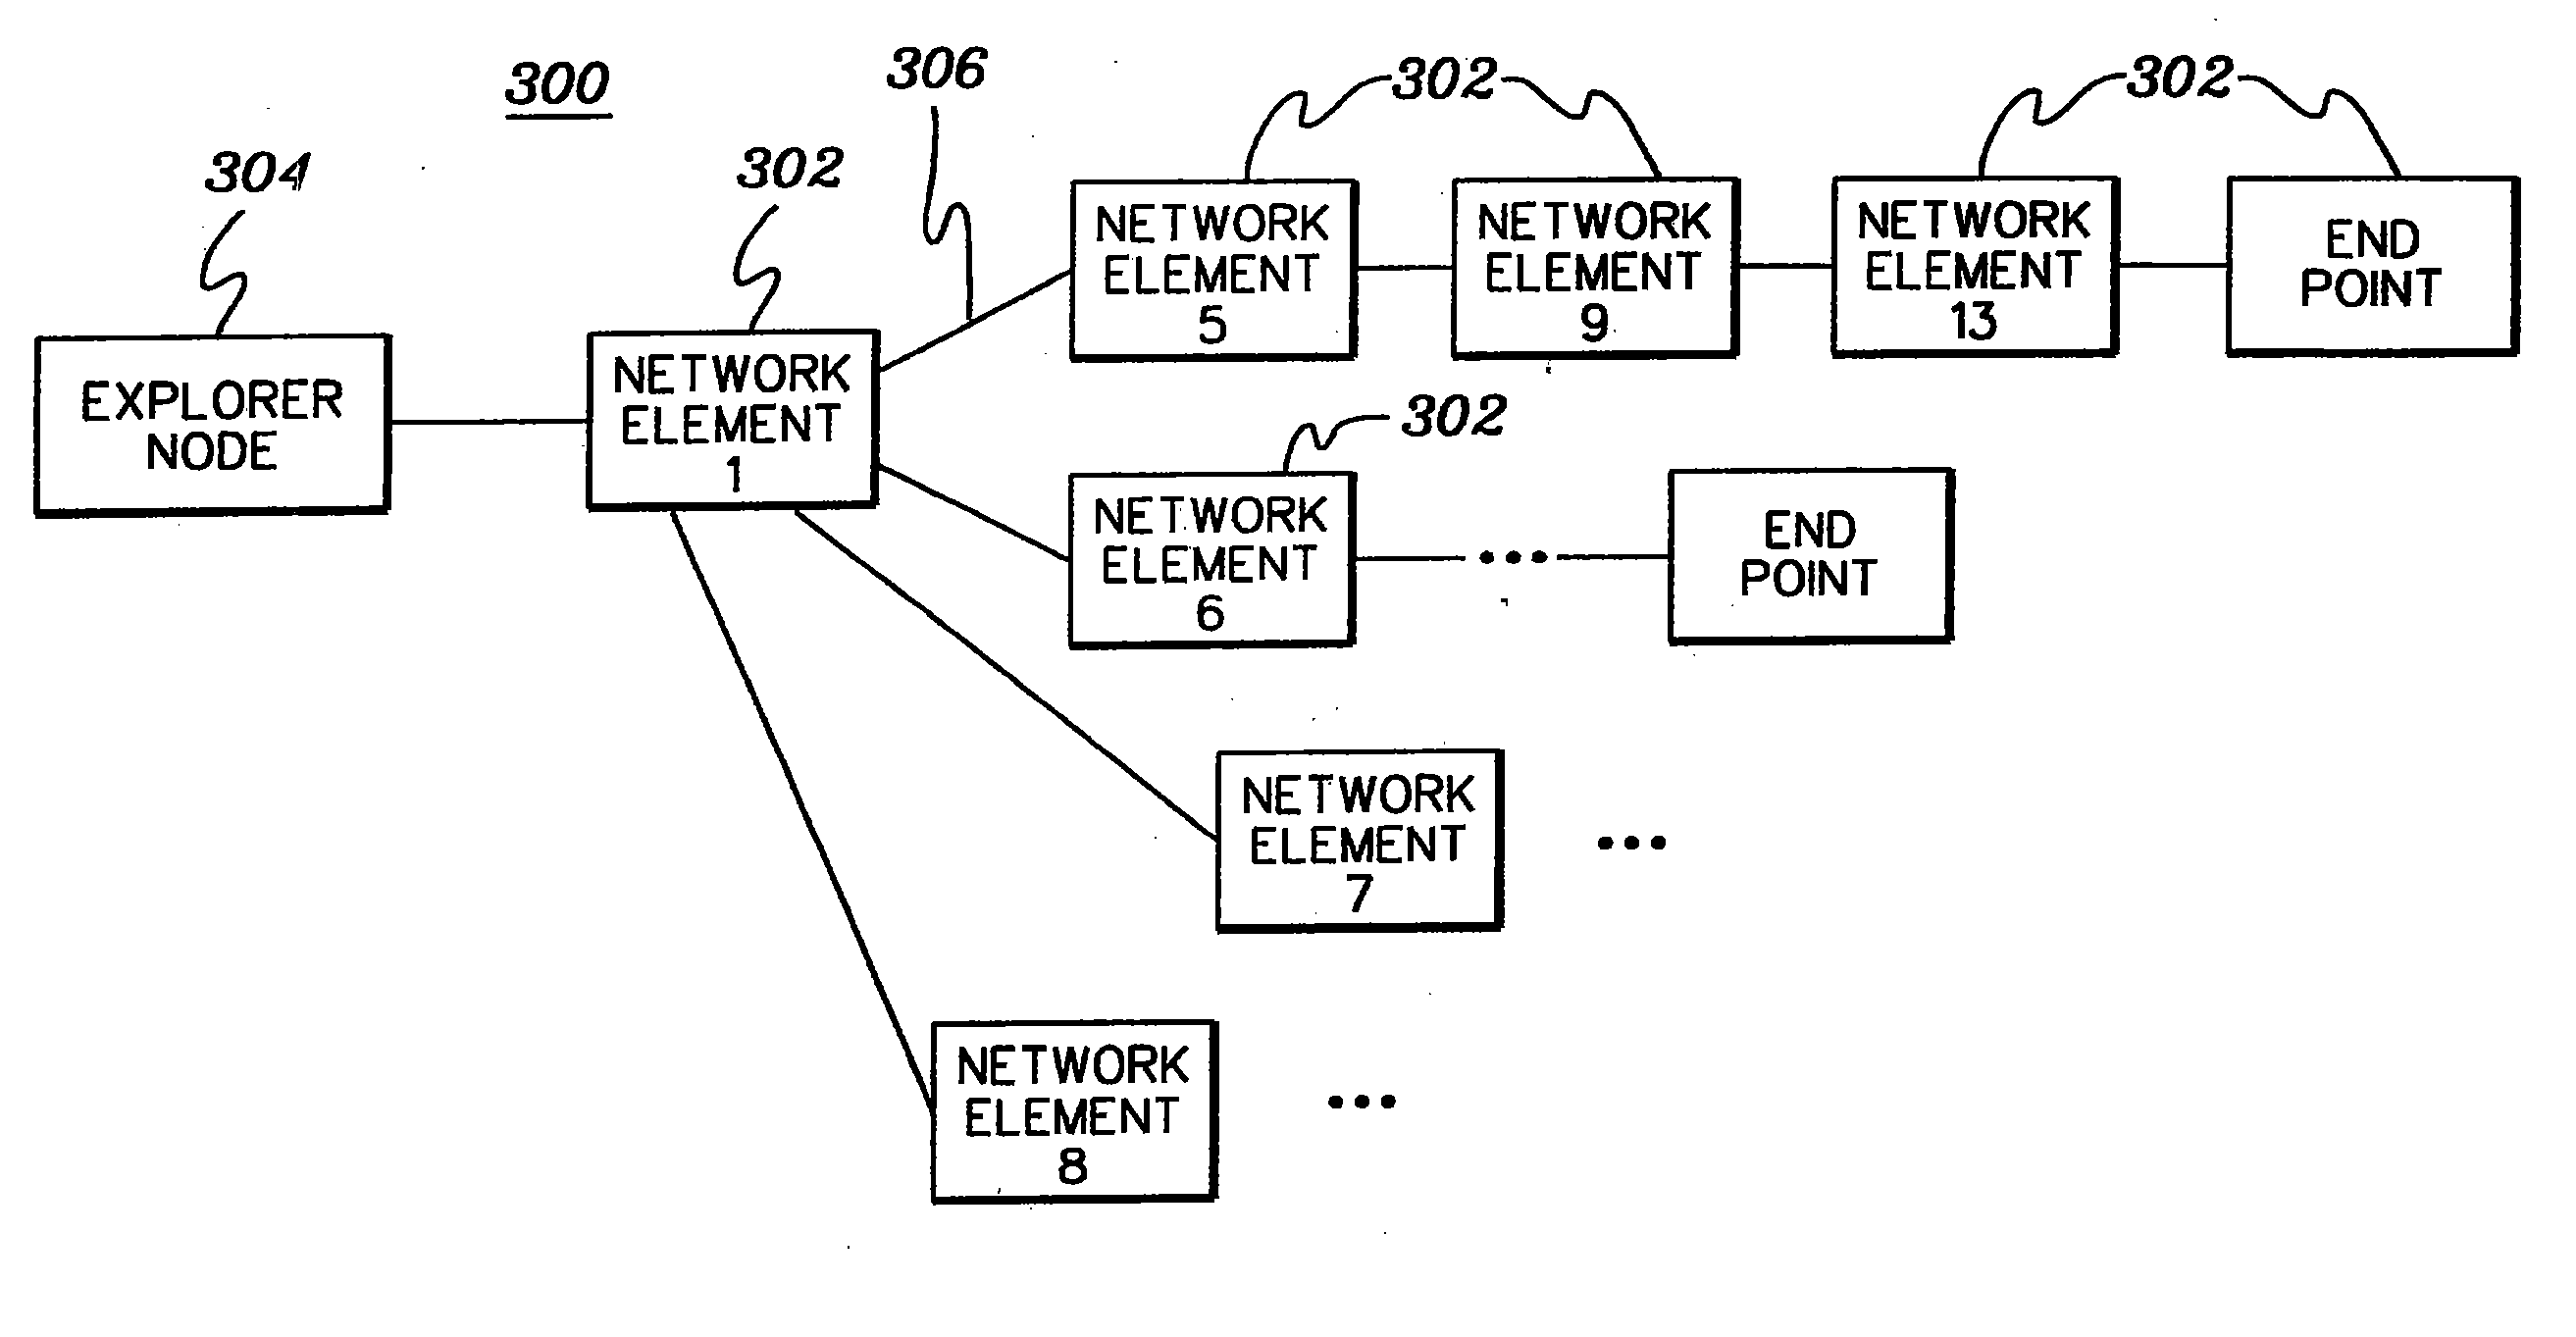 Identifying faulty network components during a network exploration